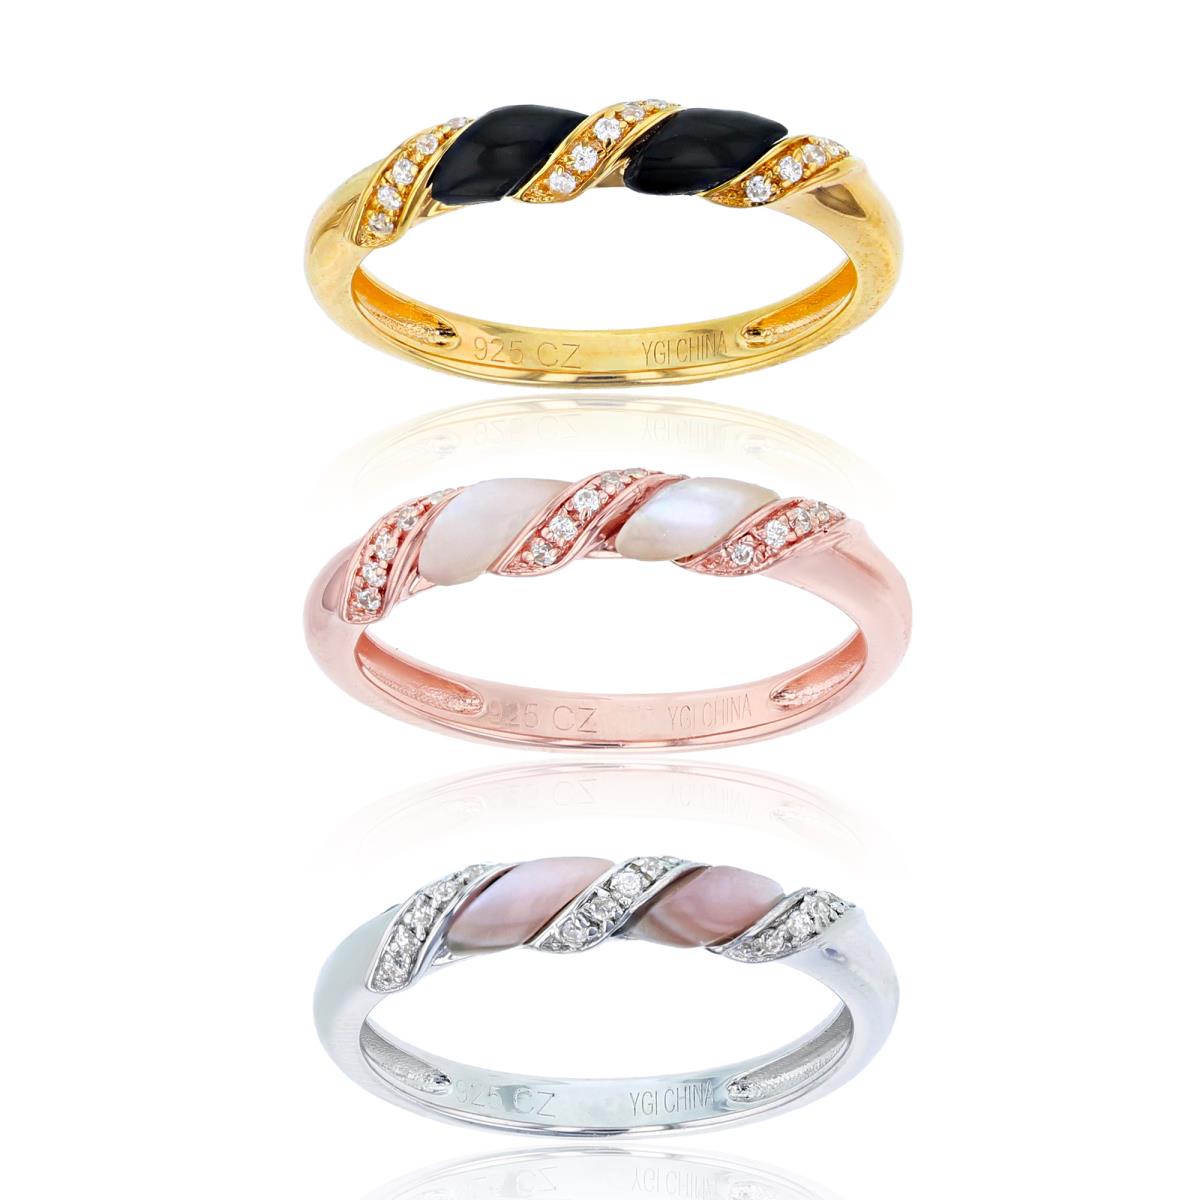 14K Tri-Color Gold 0.14 CTTW Rnd Diam & Onyx/White and Pink Mop 3-Stackable Rings